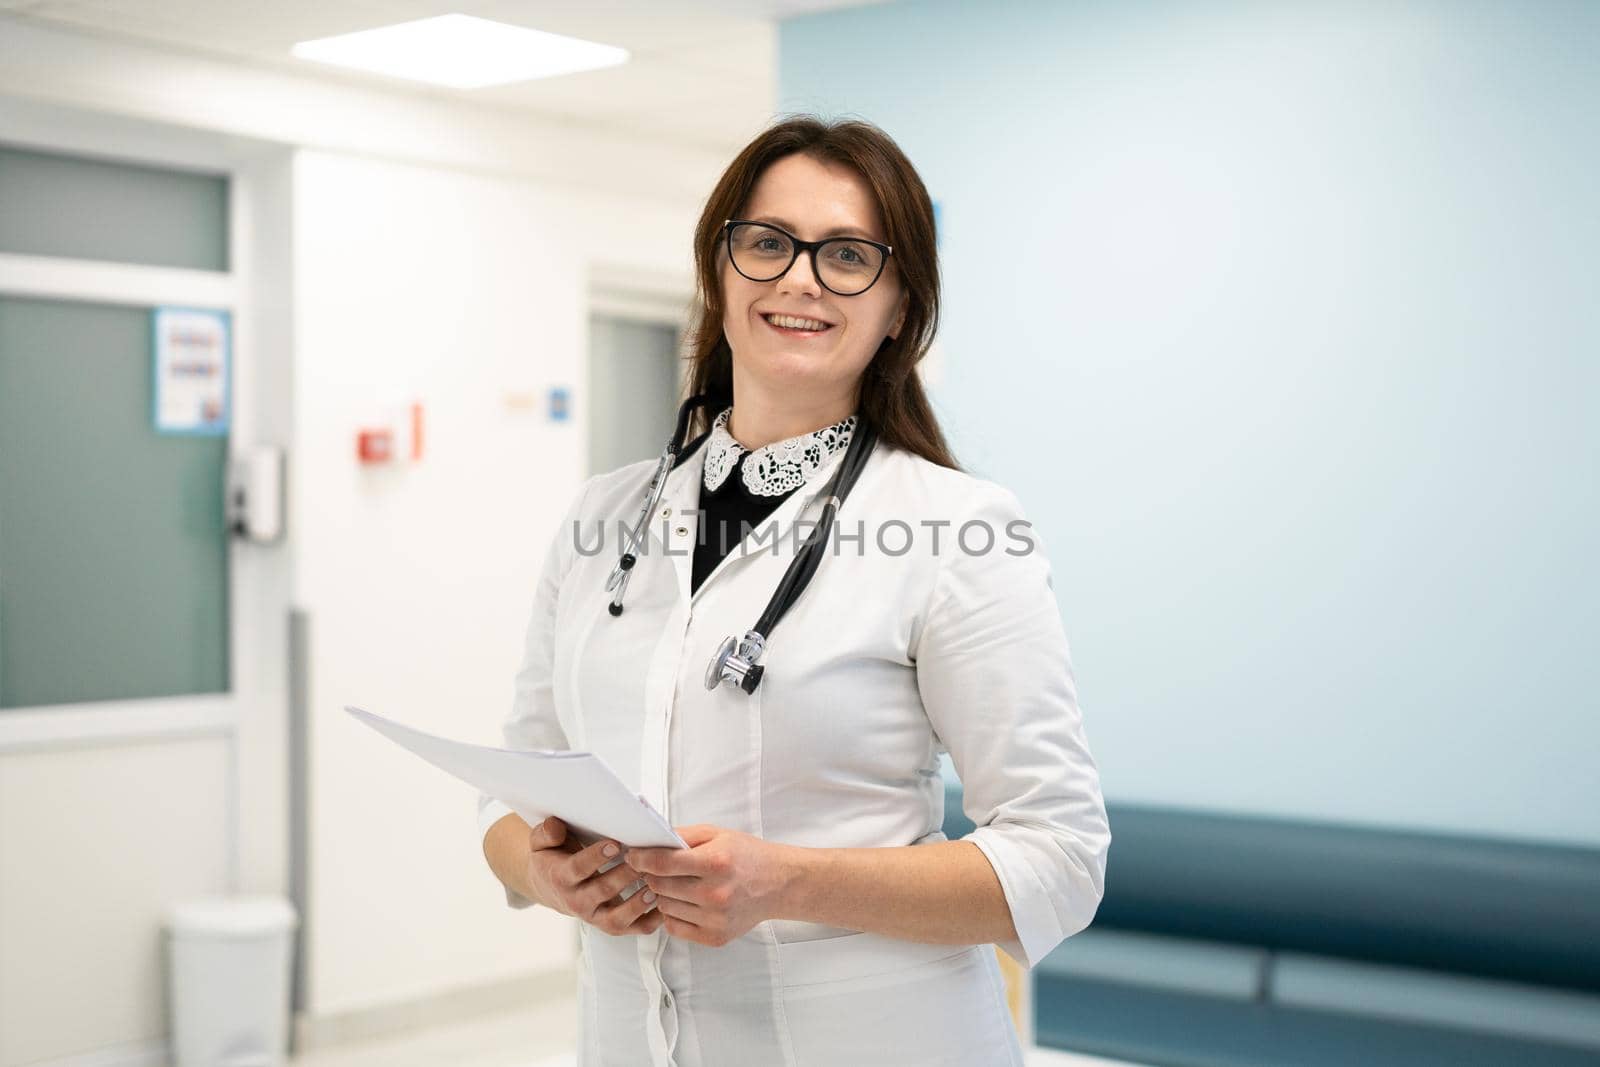 Headshot portrait of smiling millennial female doctor wearing medical uniform and stethoscope looking at camera in the corridor of a modern hospital. Healthcare concept, medical insurance by Tomashevska